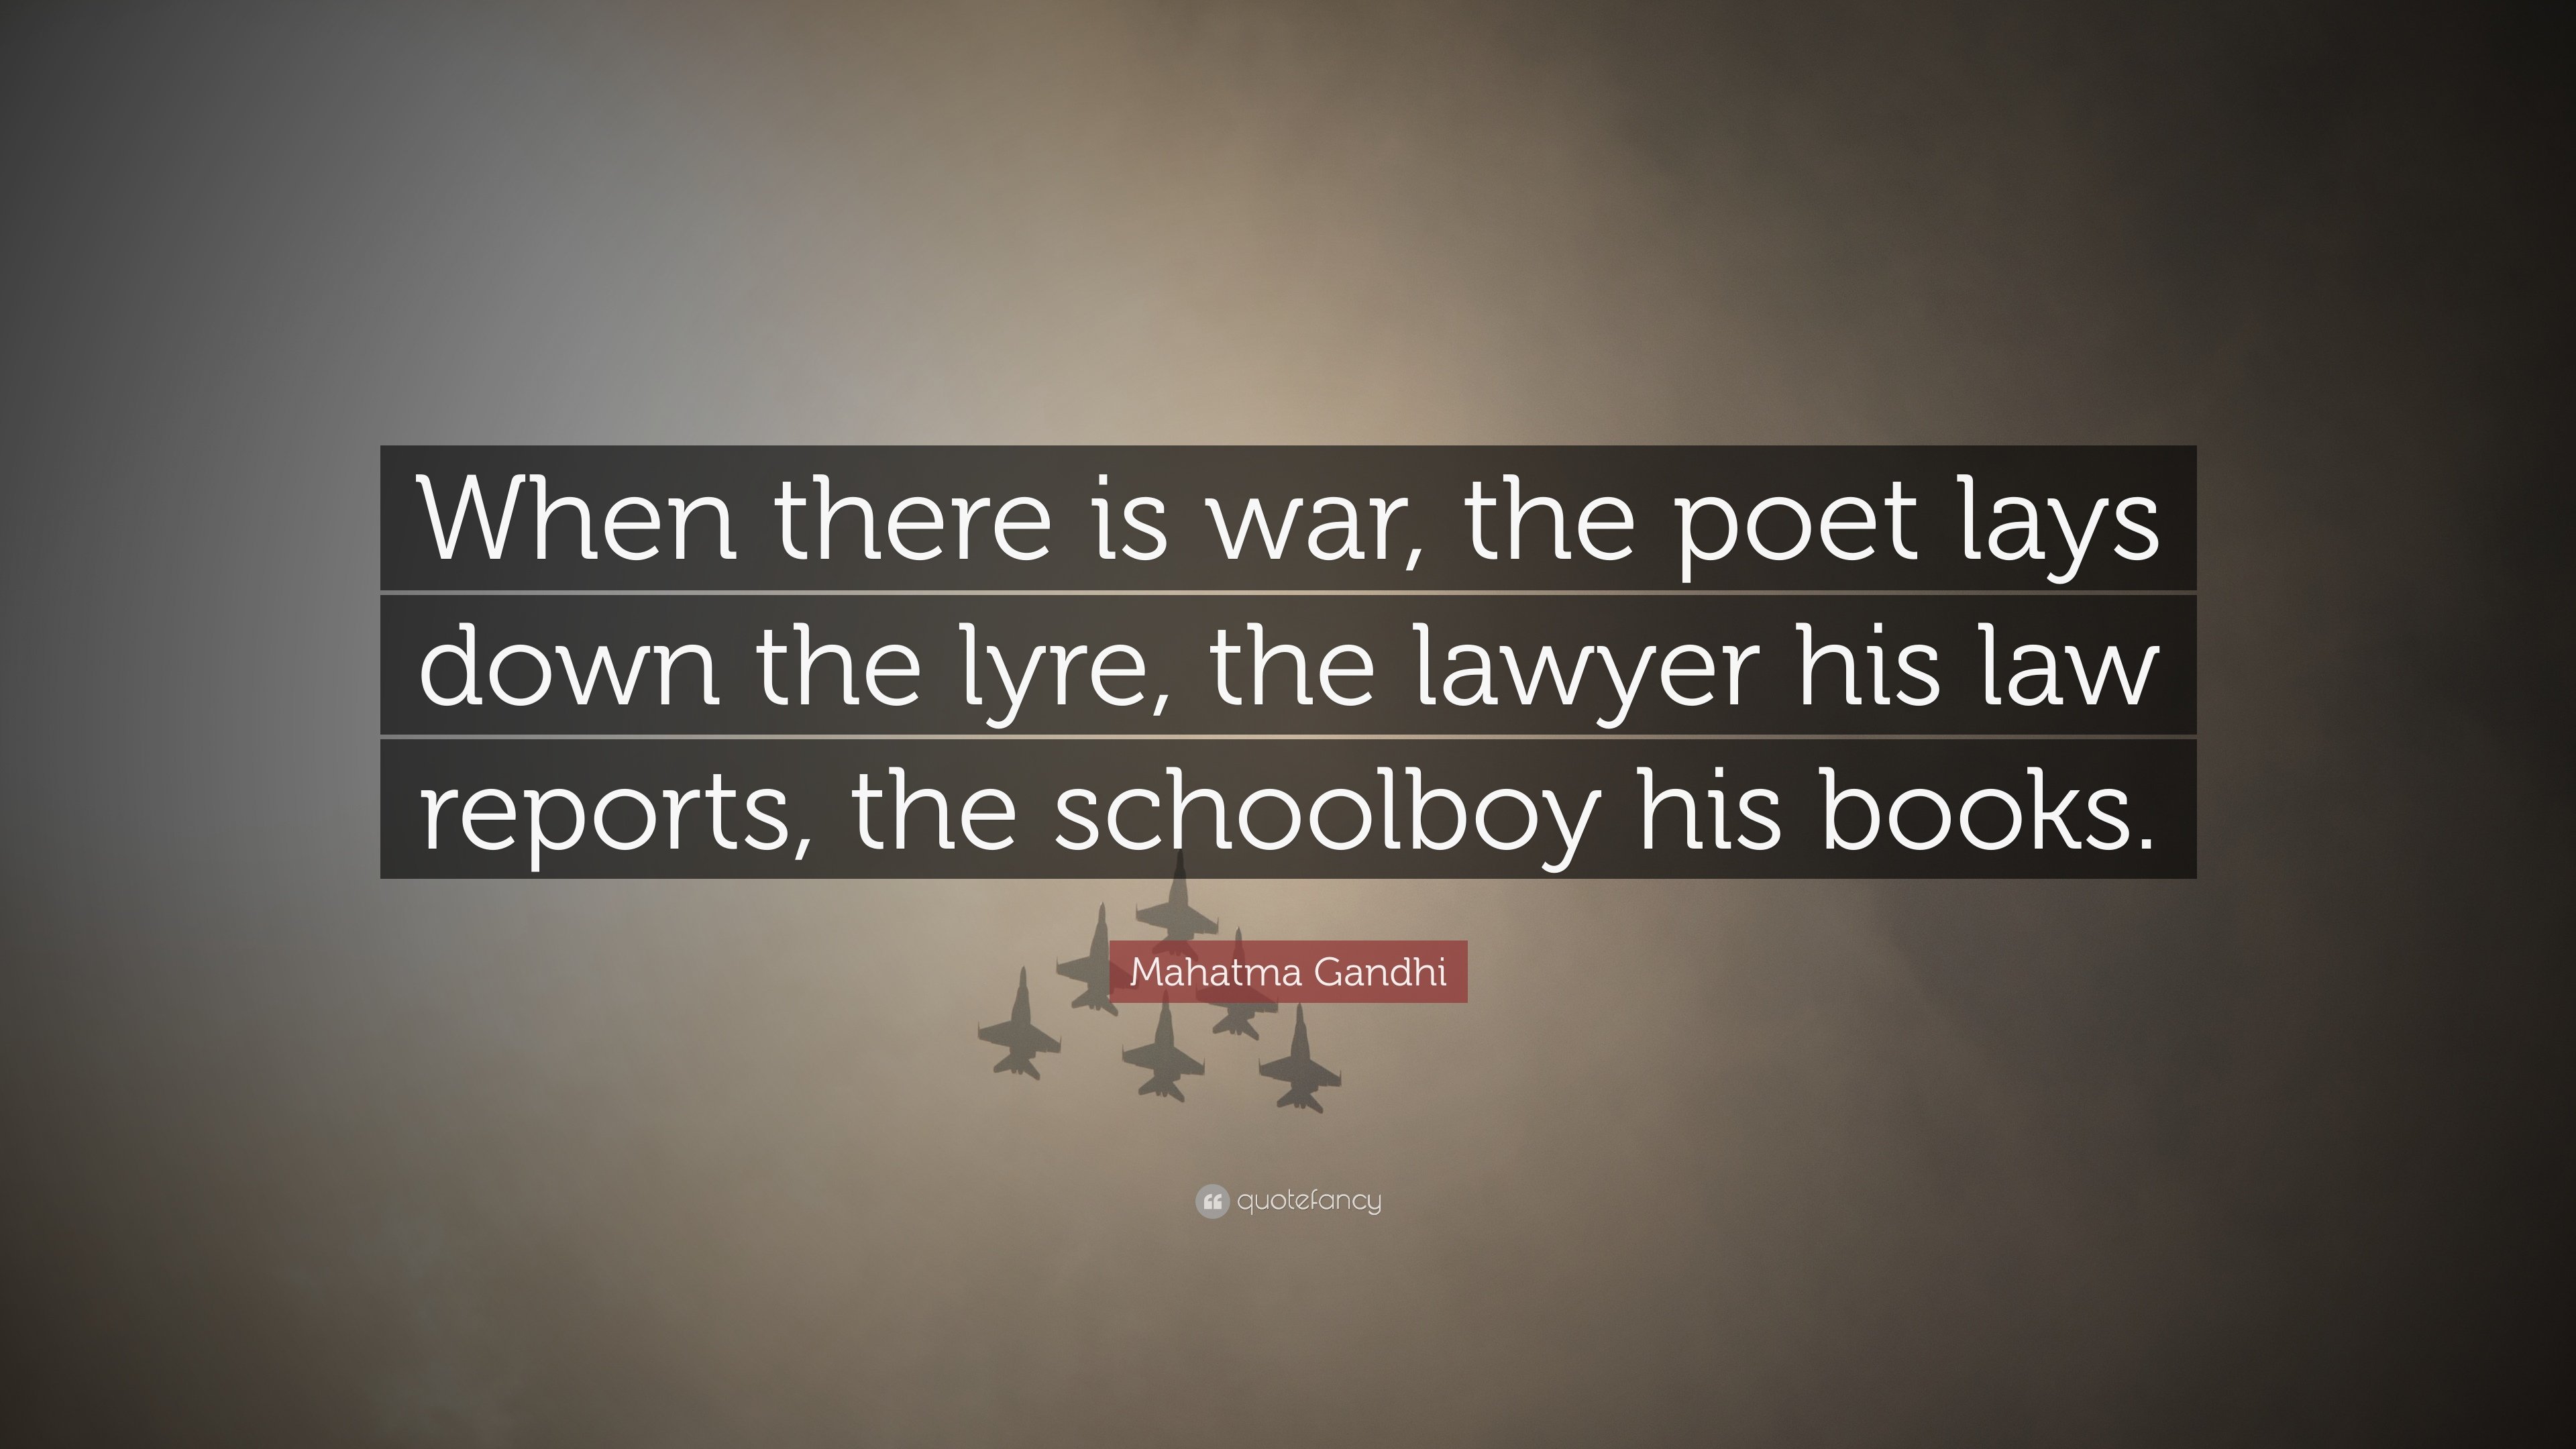 Mahatma Gandhi Quote: “When there is war, the poet lays down